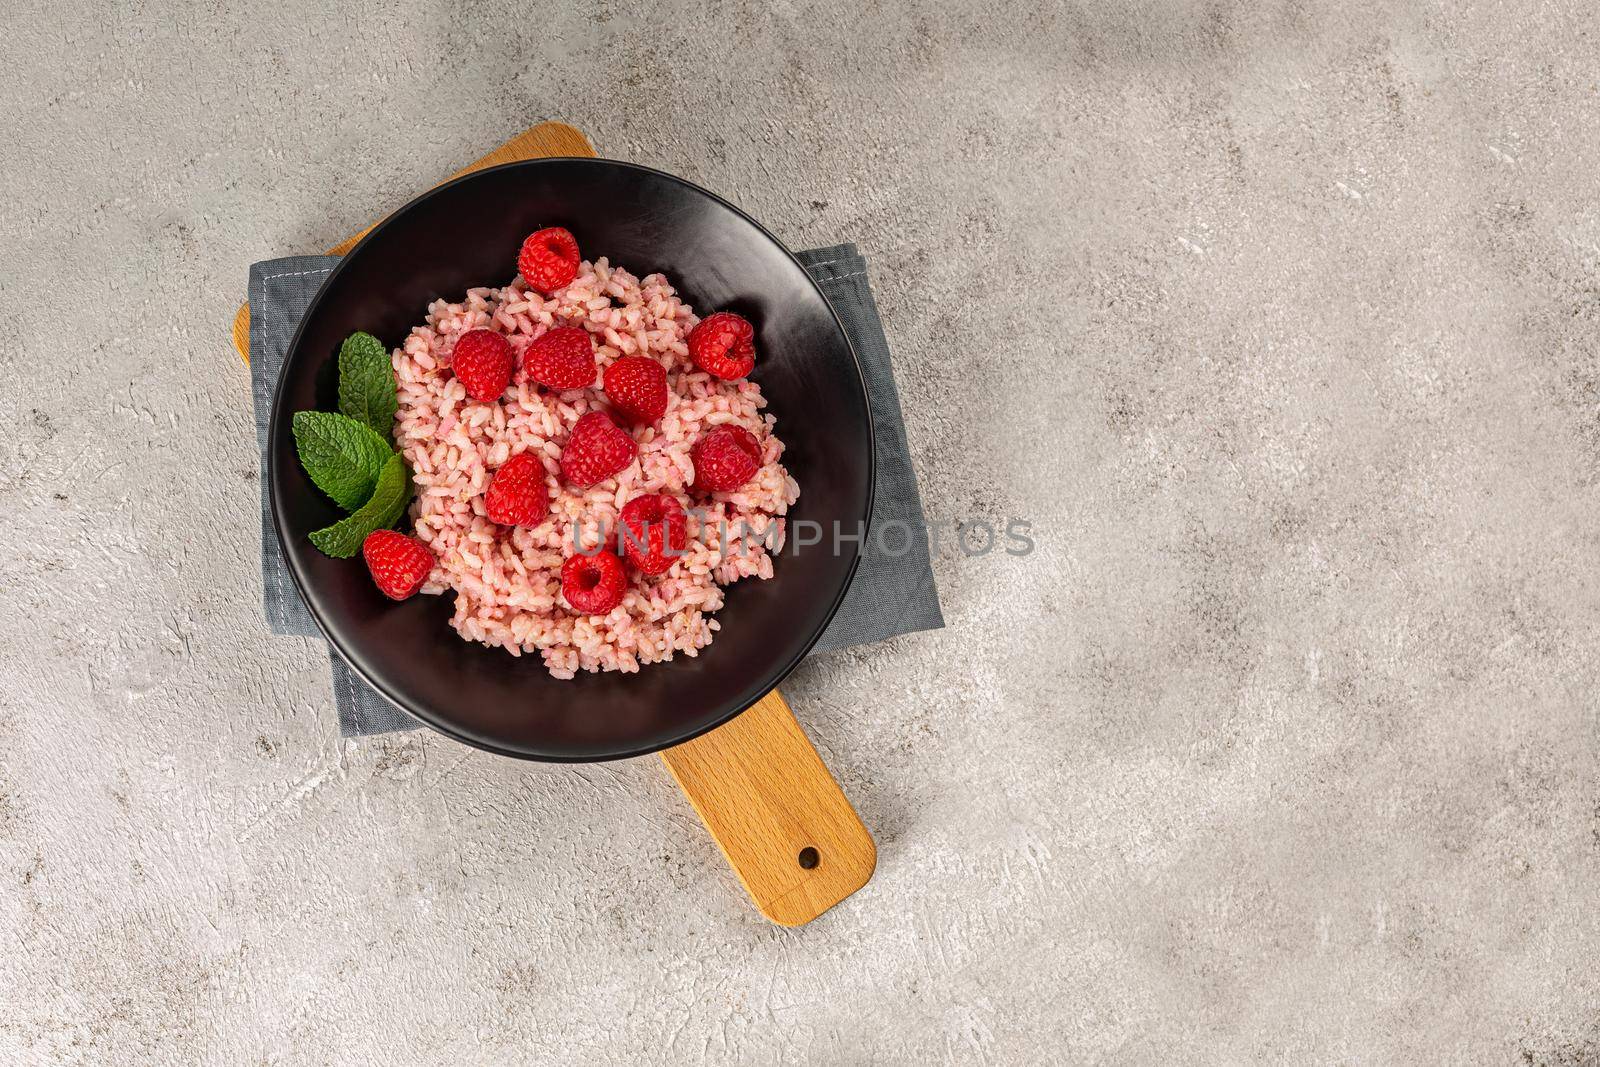 risotto with raspberries and greek yogurt on grey background. by Ciorba